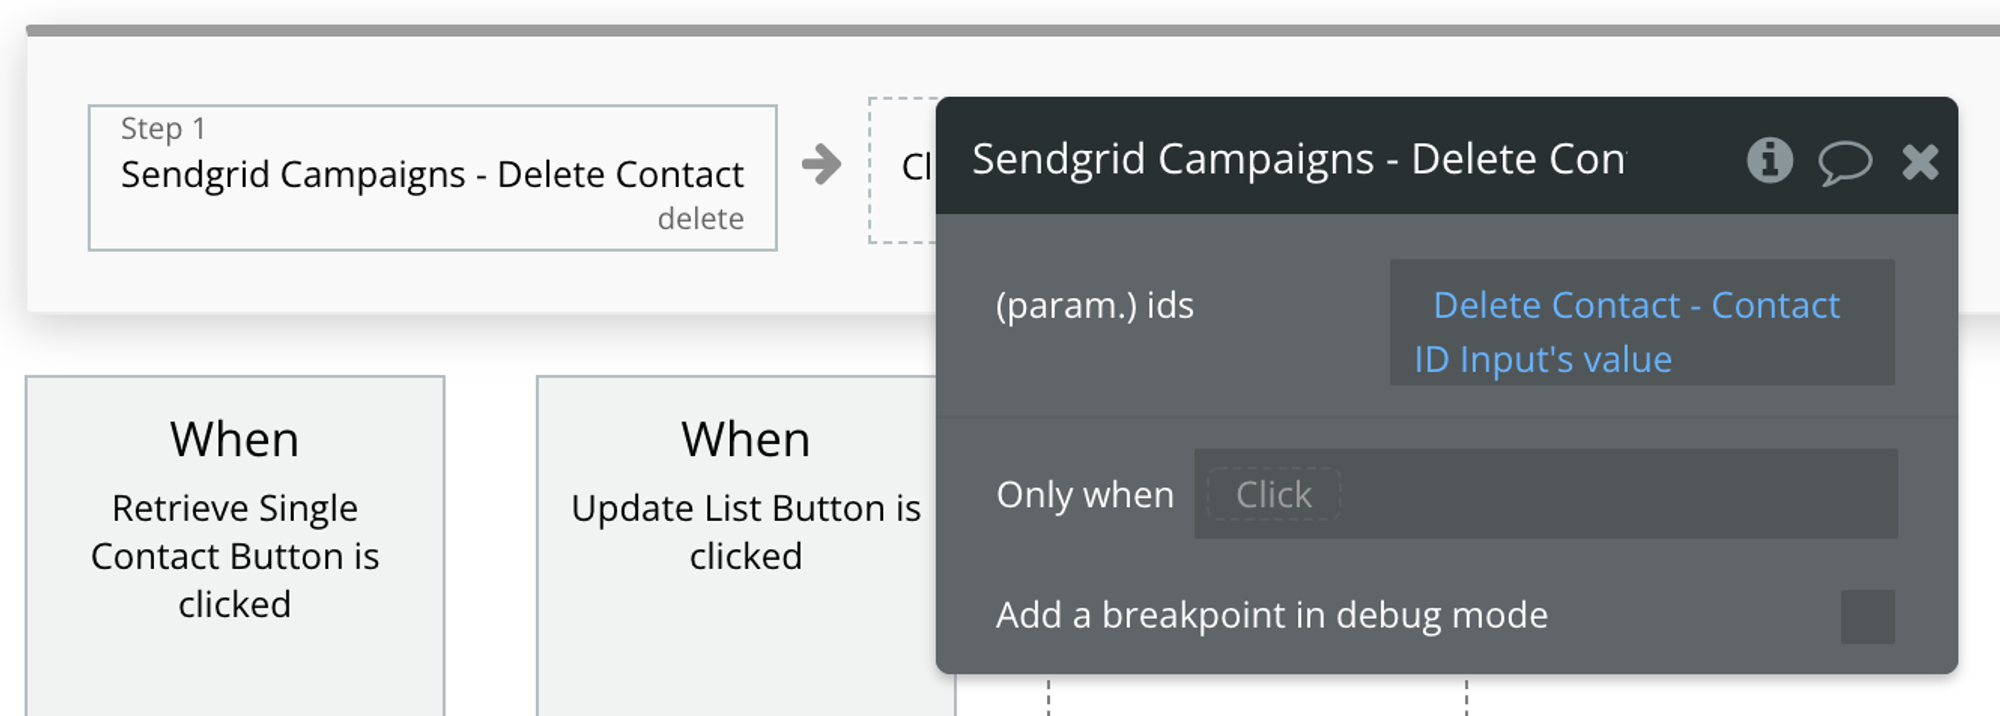 Select Sendgrid Campaigns - Delete Contact from the list of Plugin actions